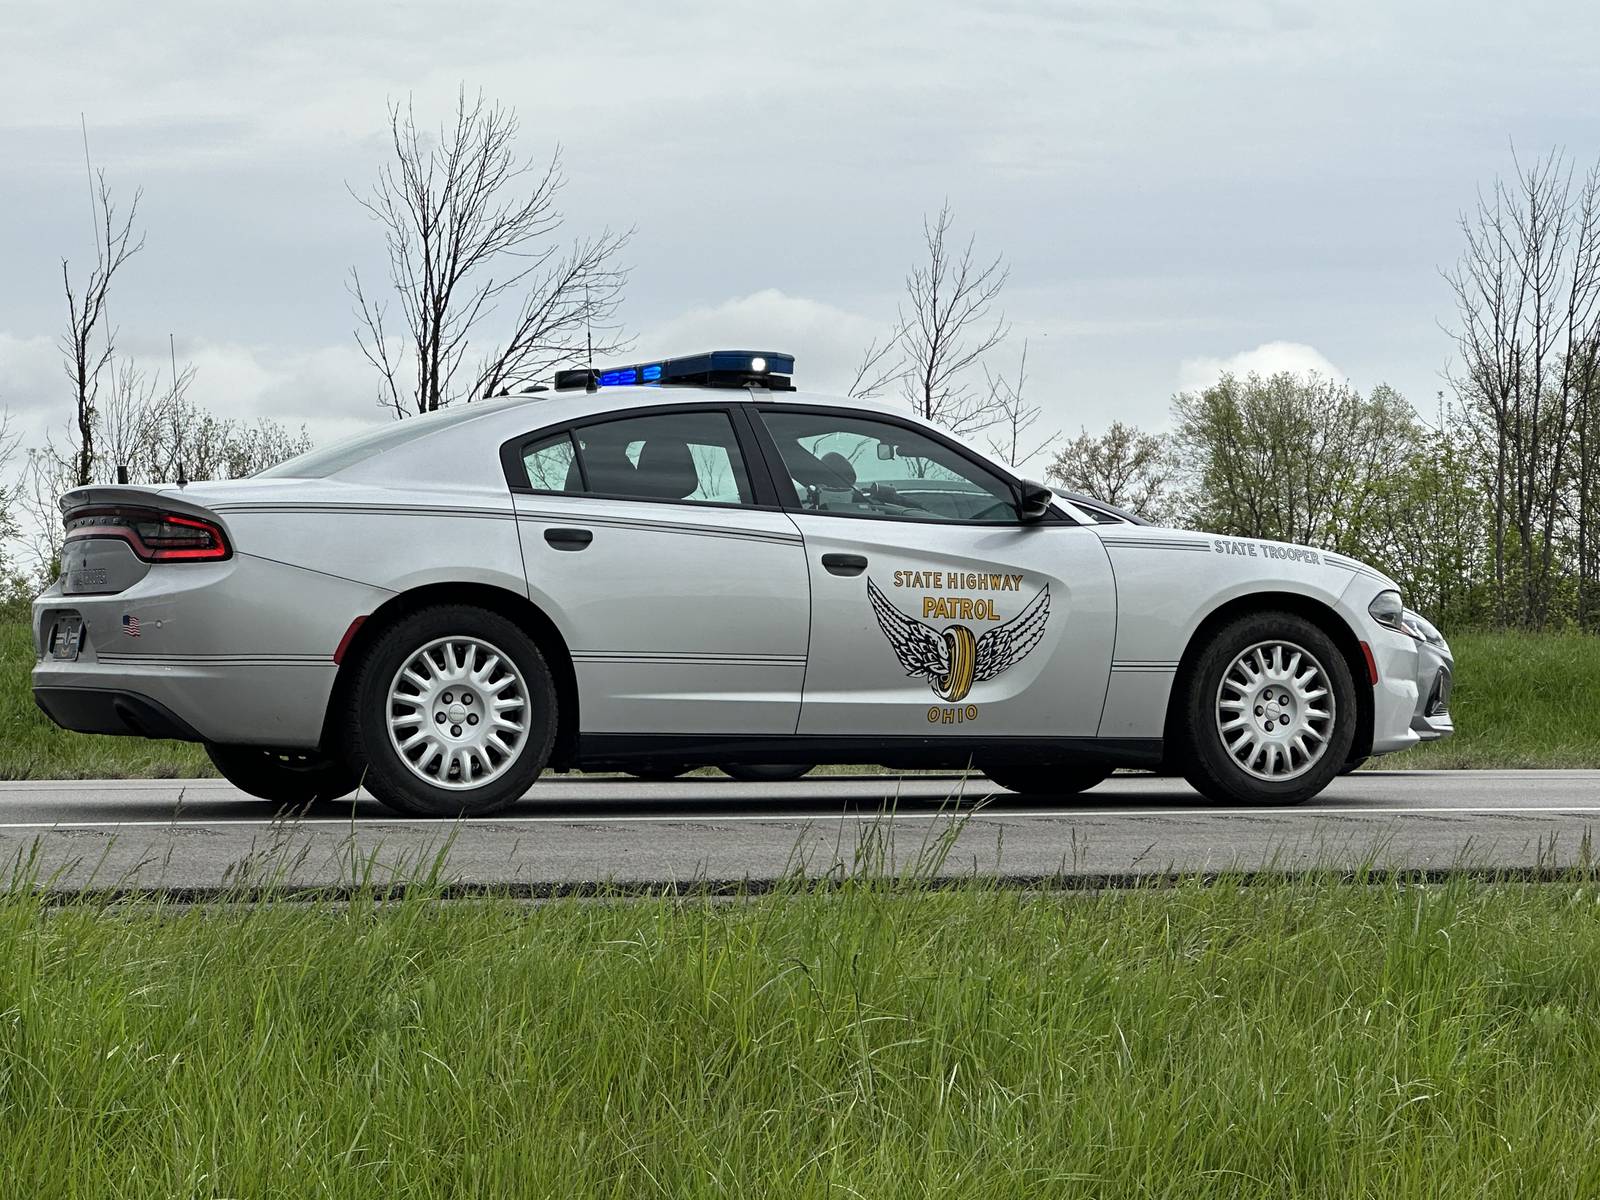 Over 400 drivers checked at Ohio State Highway Patrol OVI checkpoint in ...